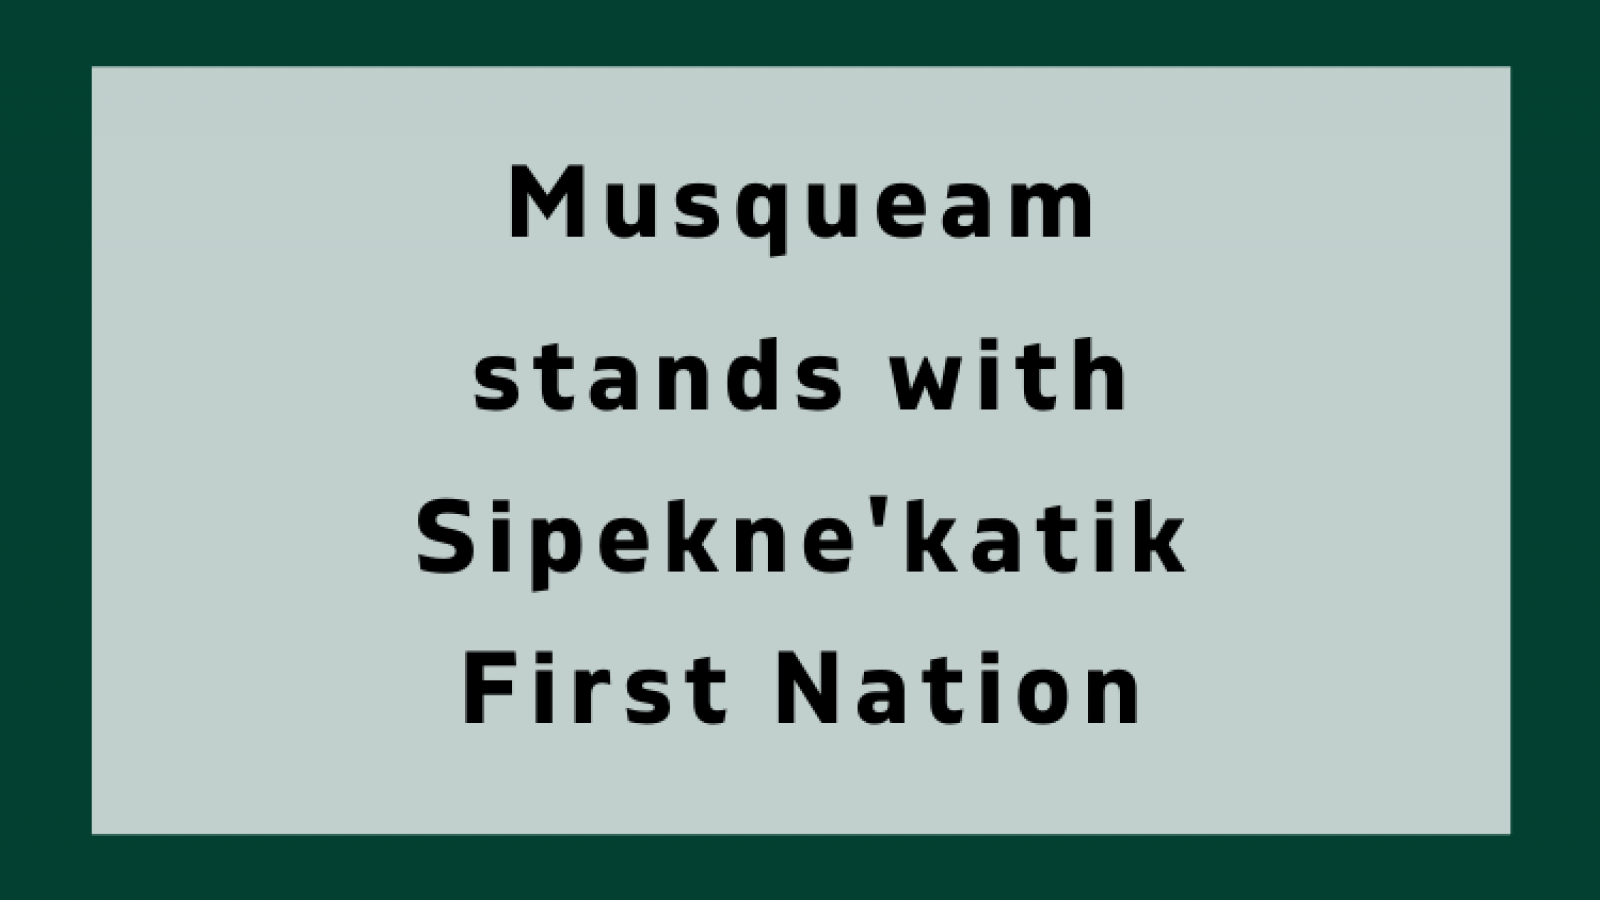 Musqueam Stands with Sipekne'keatik First Nation